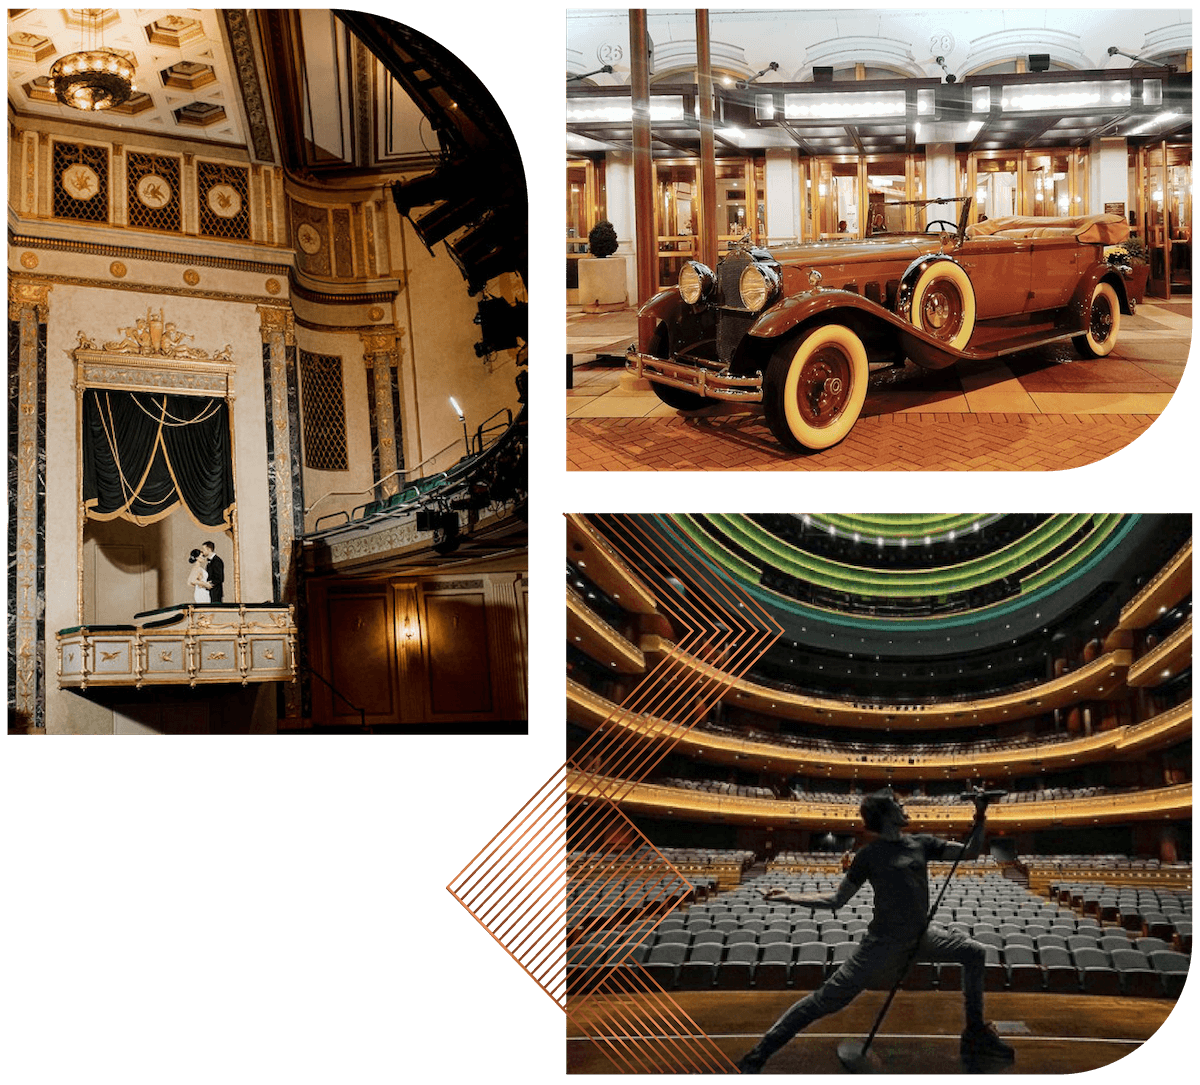 Art and culture collage of a performing theater, and old car, and a performer on stage